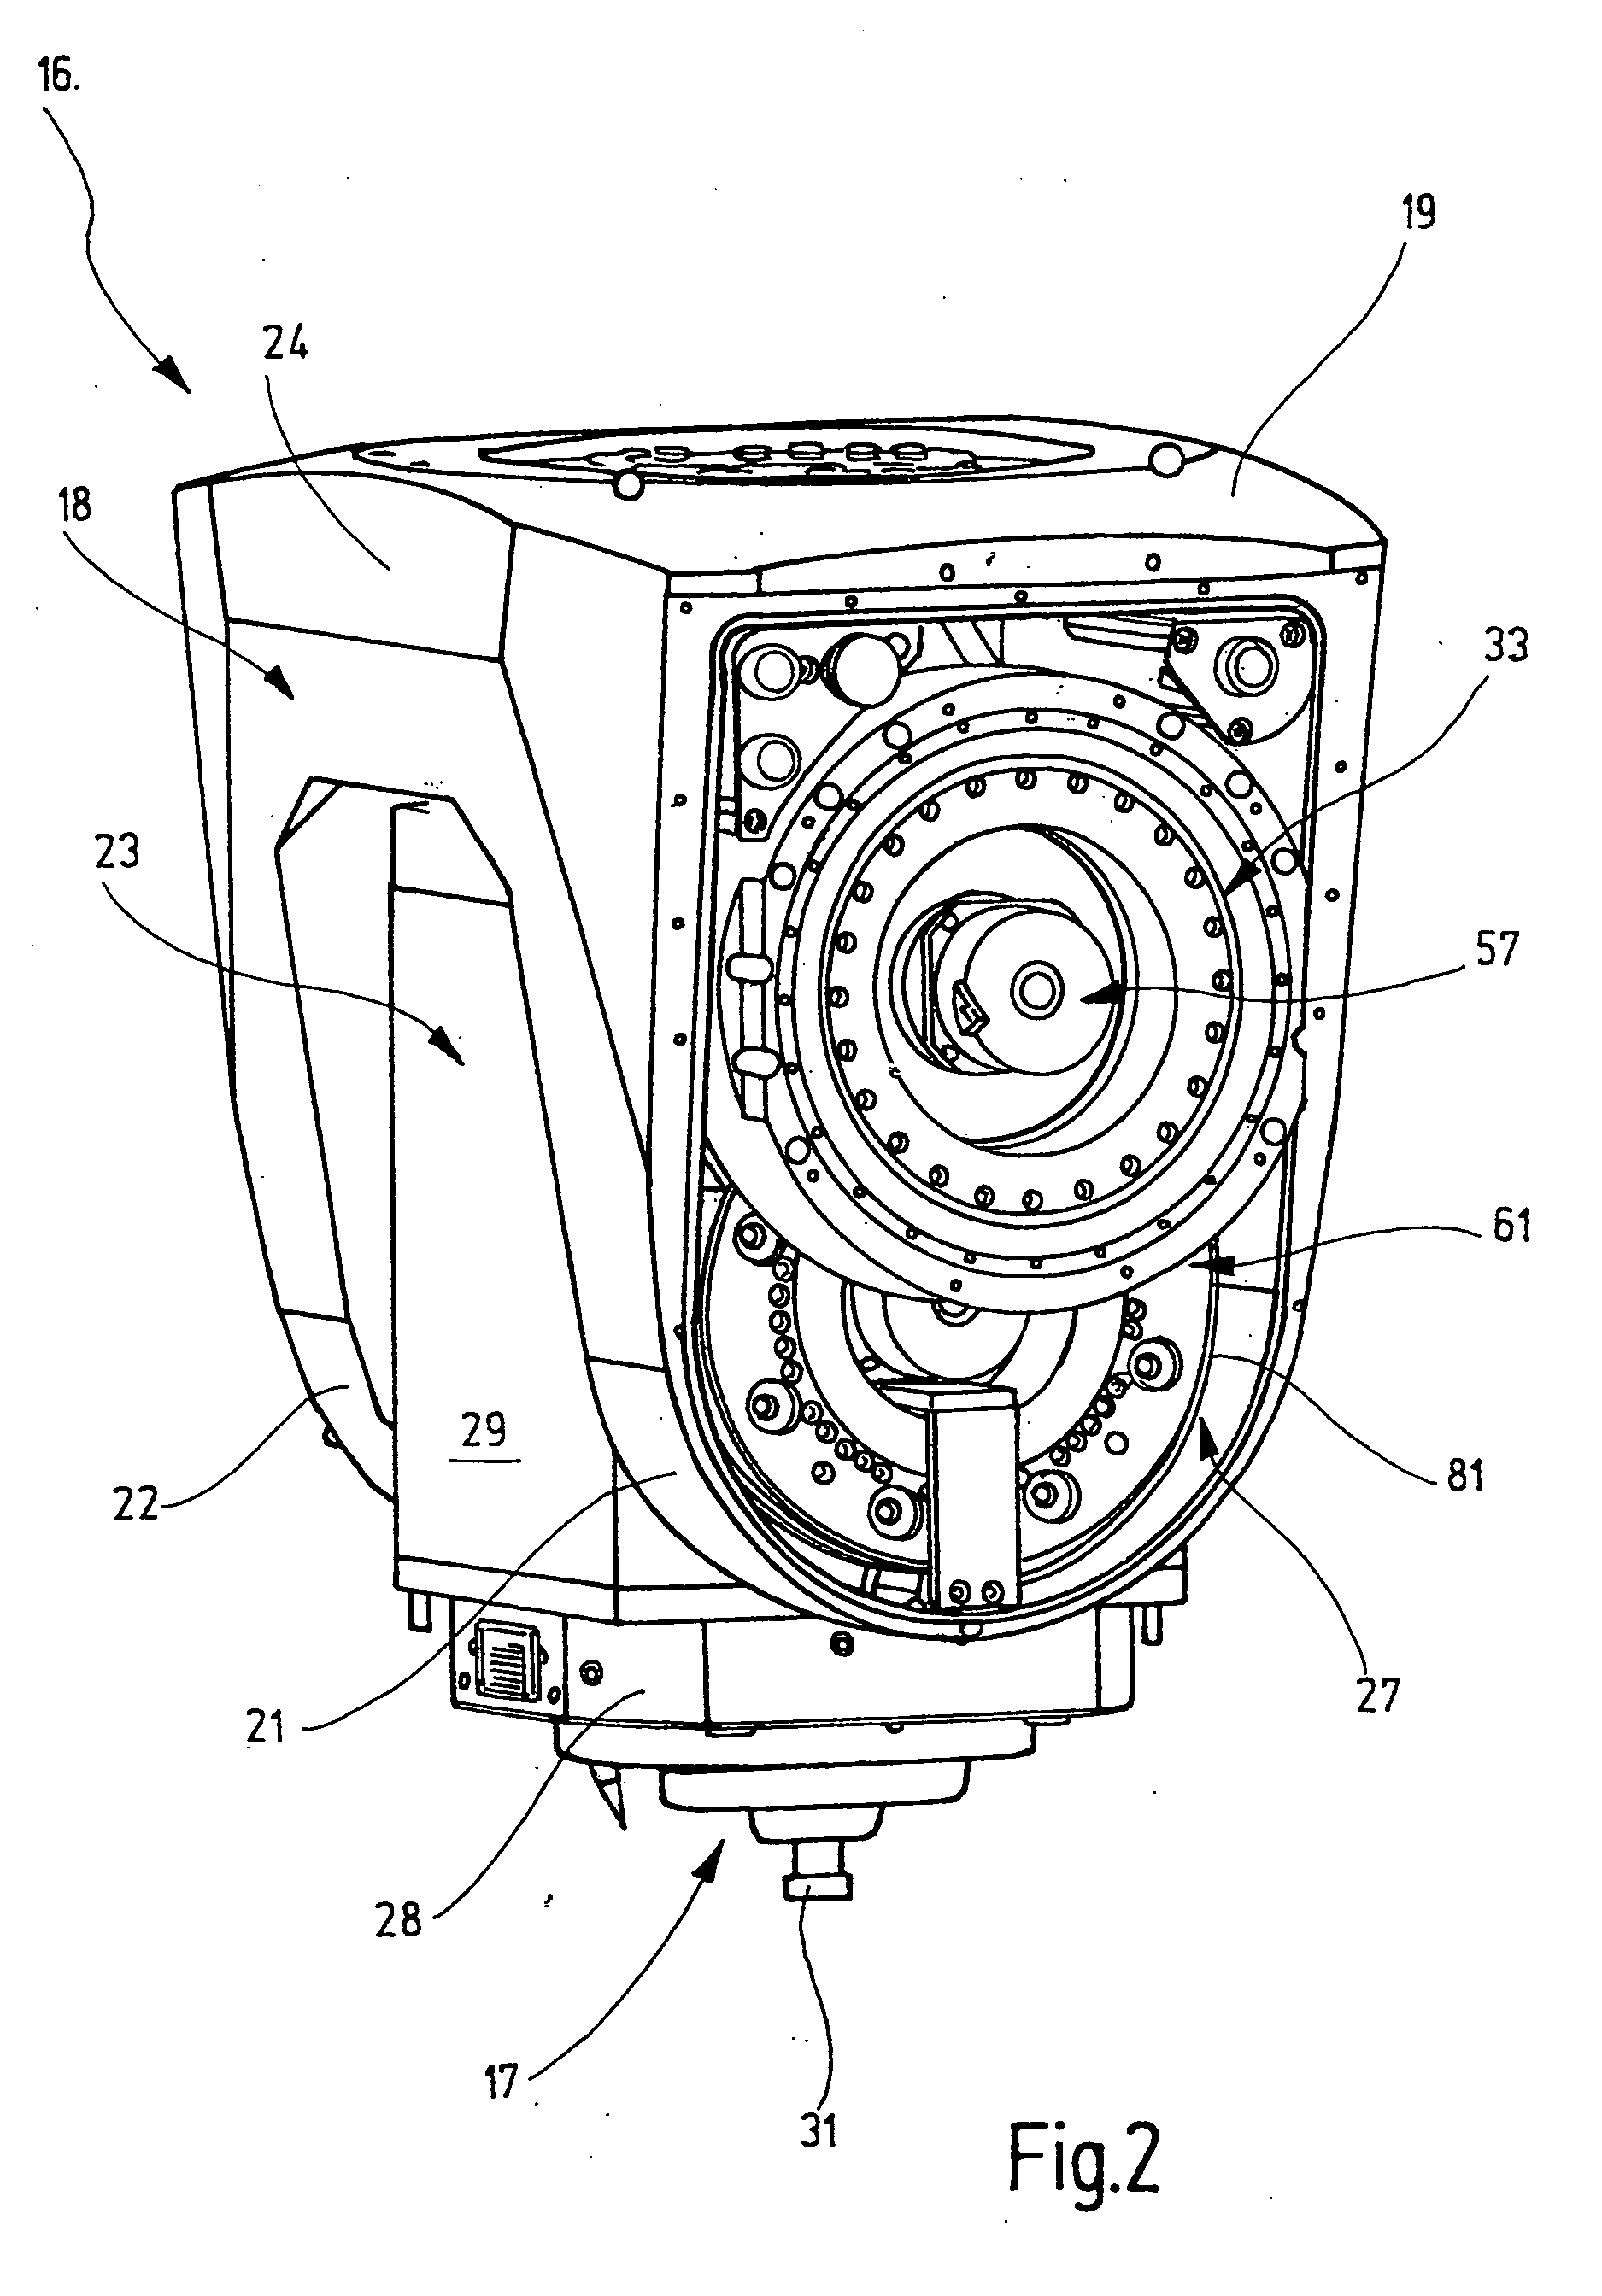 Mobile milling head with torque motor drive